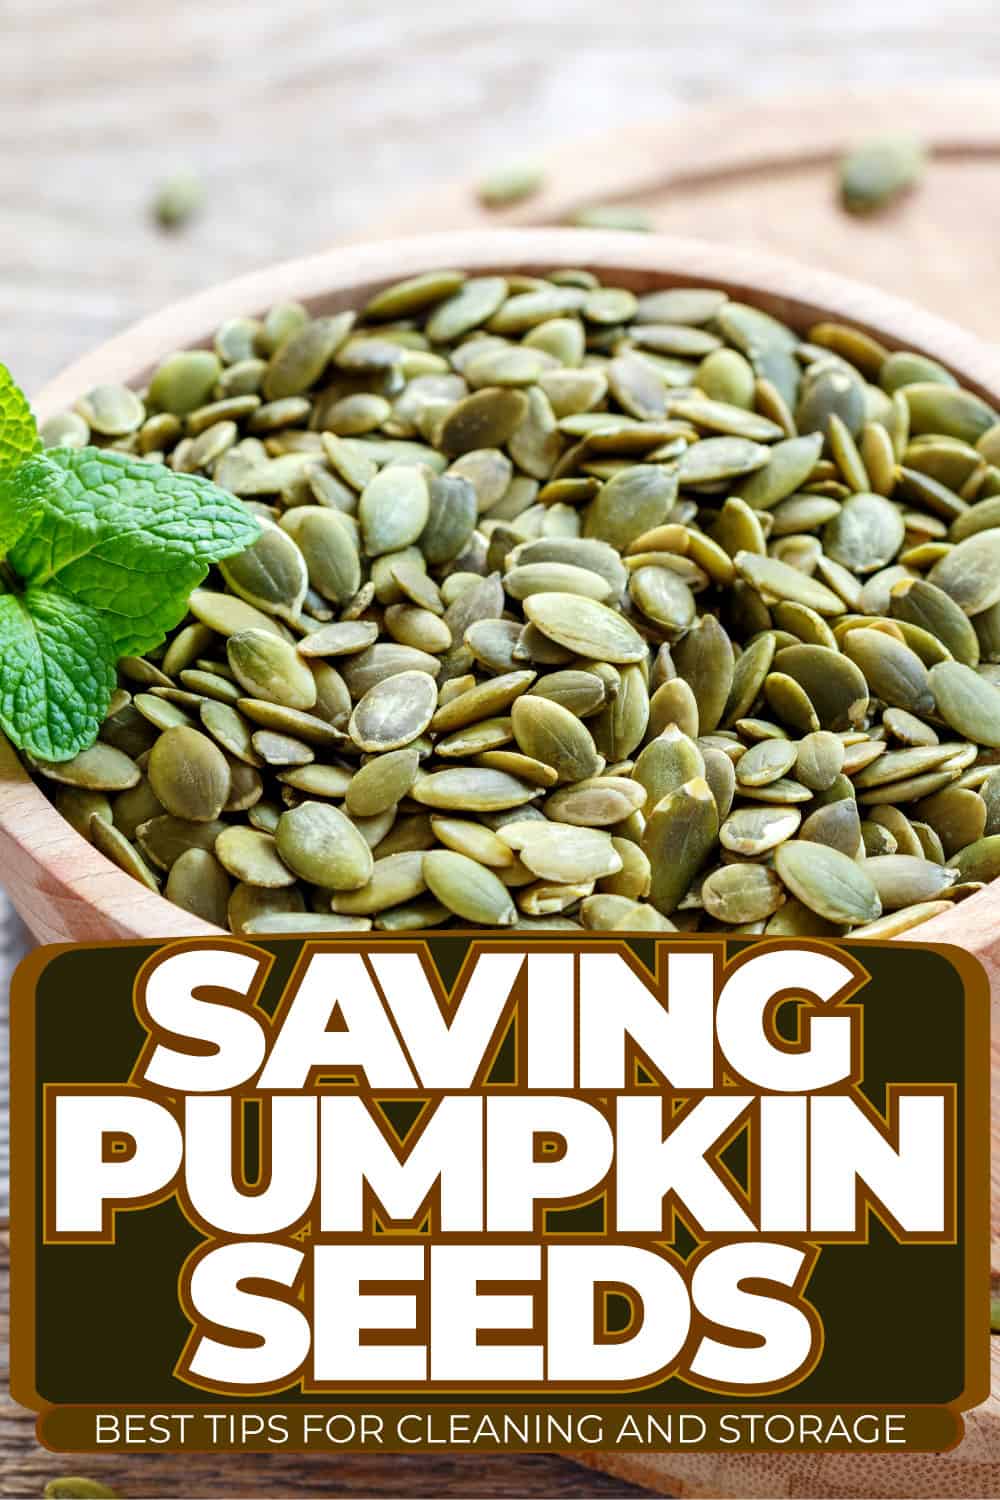 Saving Pumpkin Seeds Best Tips For Cleaning And Storage